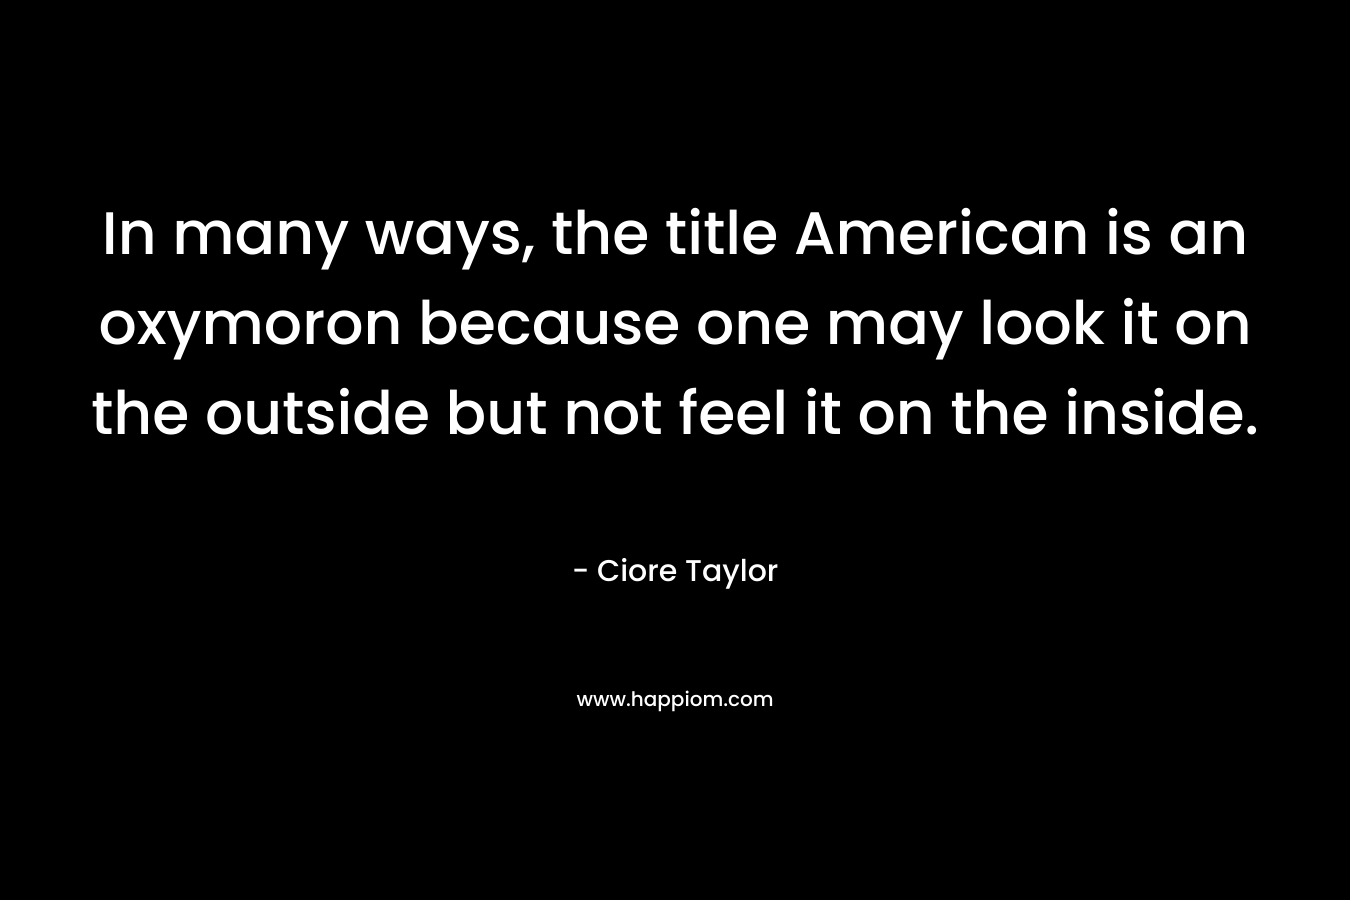 In many ways, the title American is an oxymoron because one may look it on the outside but not feel it on the inside. – Ciore Taylor